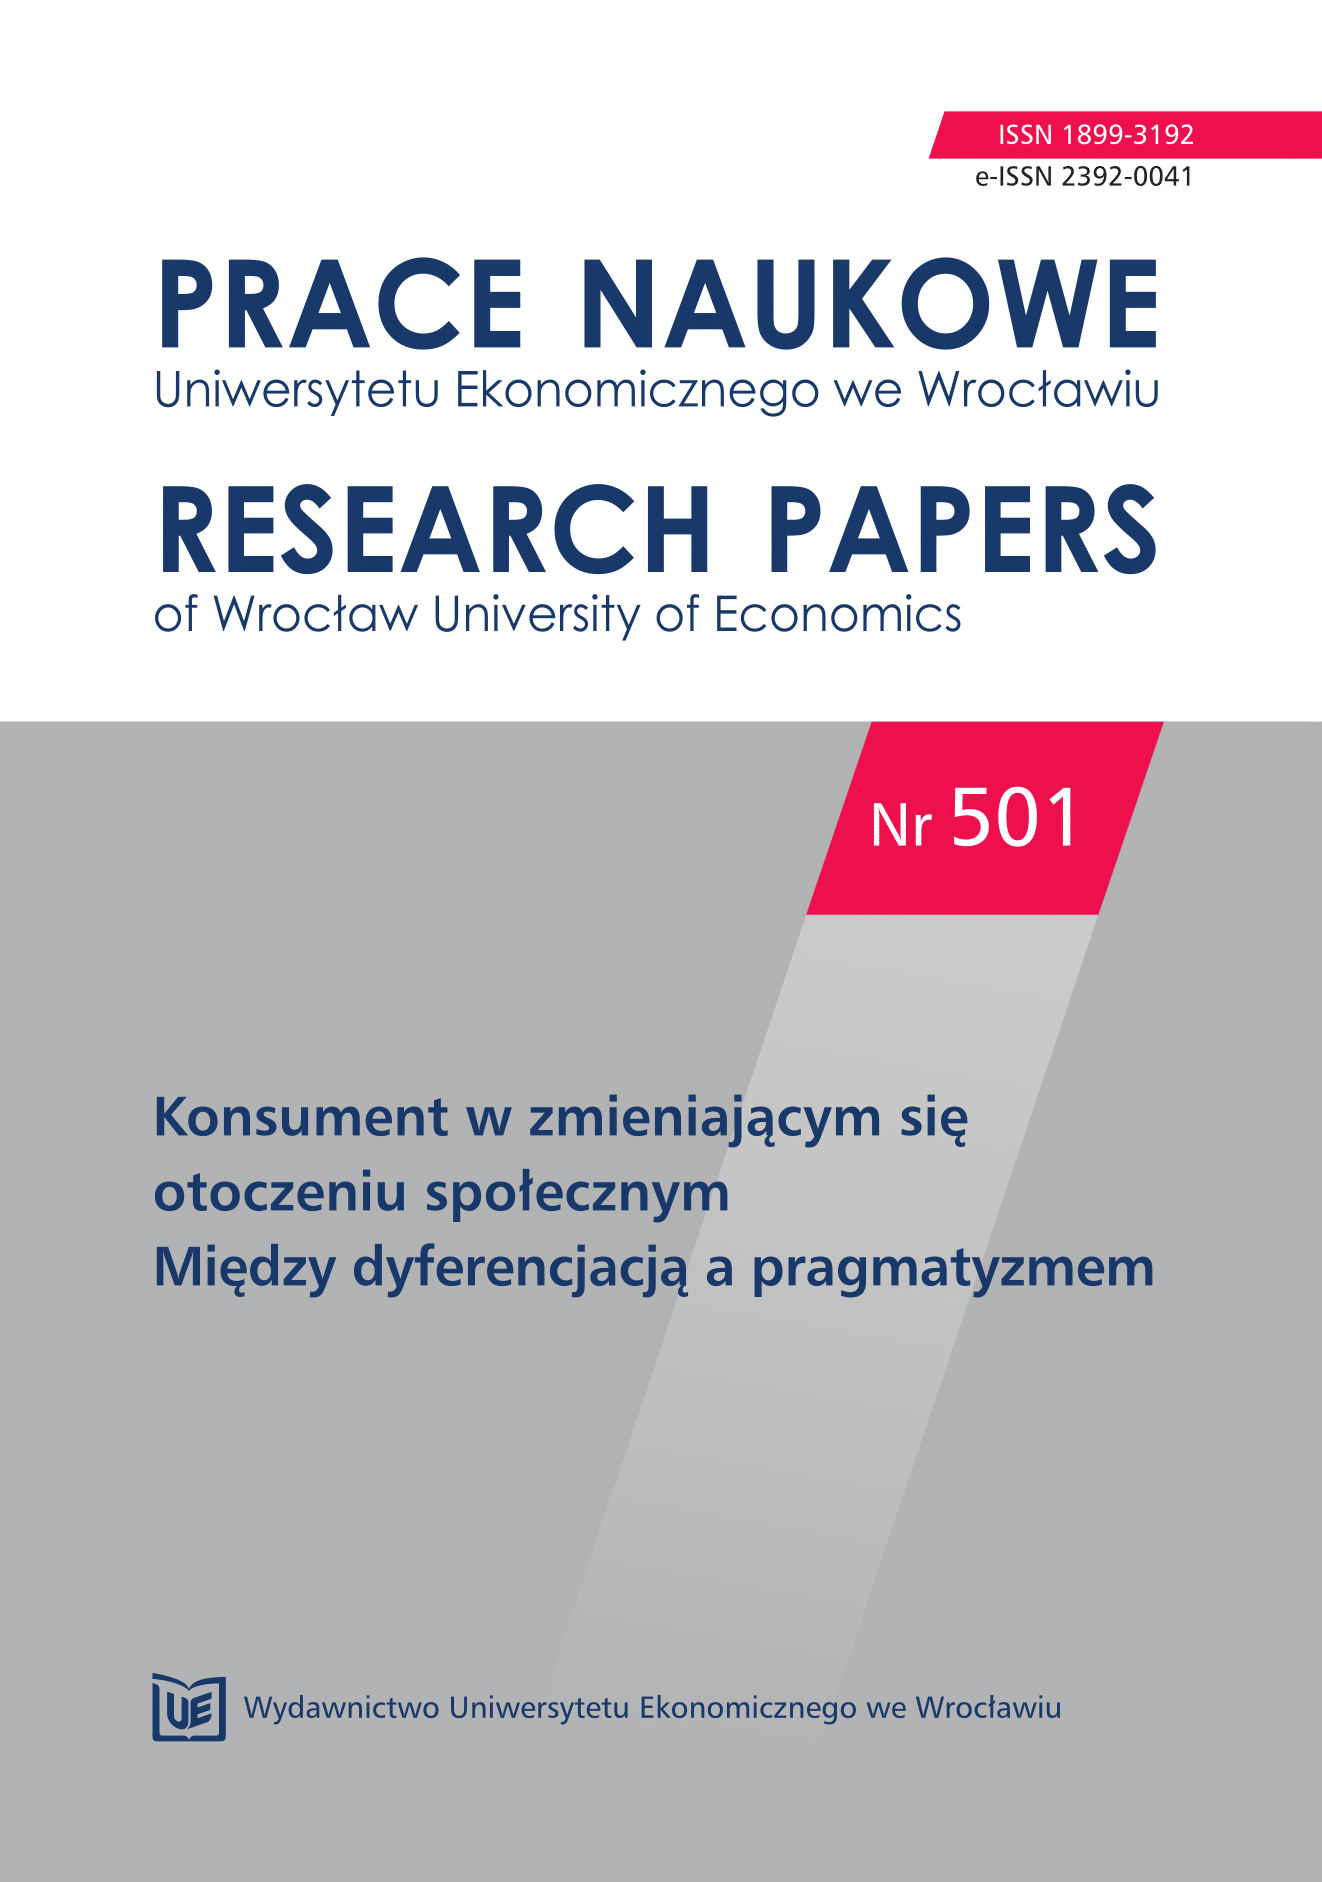 Demographic conditions of consumption –
seniors on goods and services market in Poland Cover Image